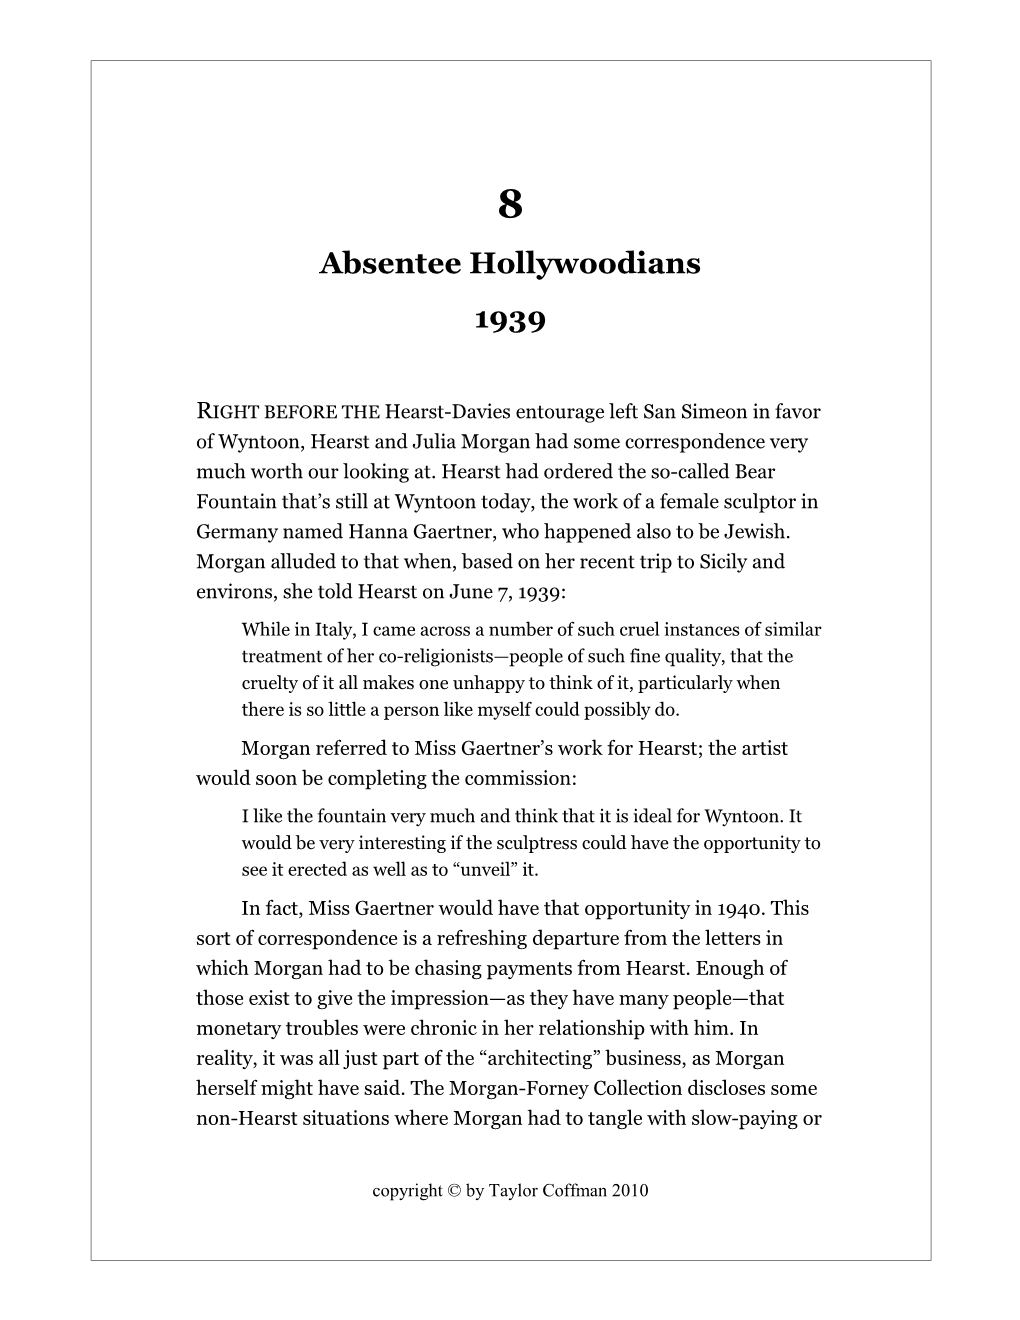 Absentee Hollywoodians 1939